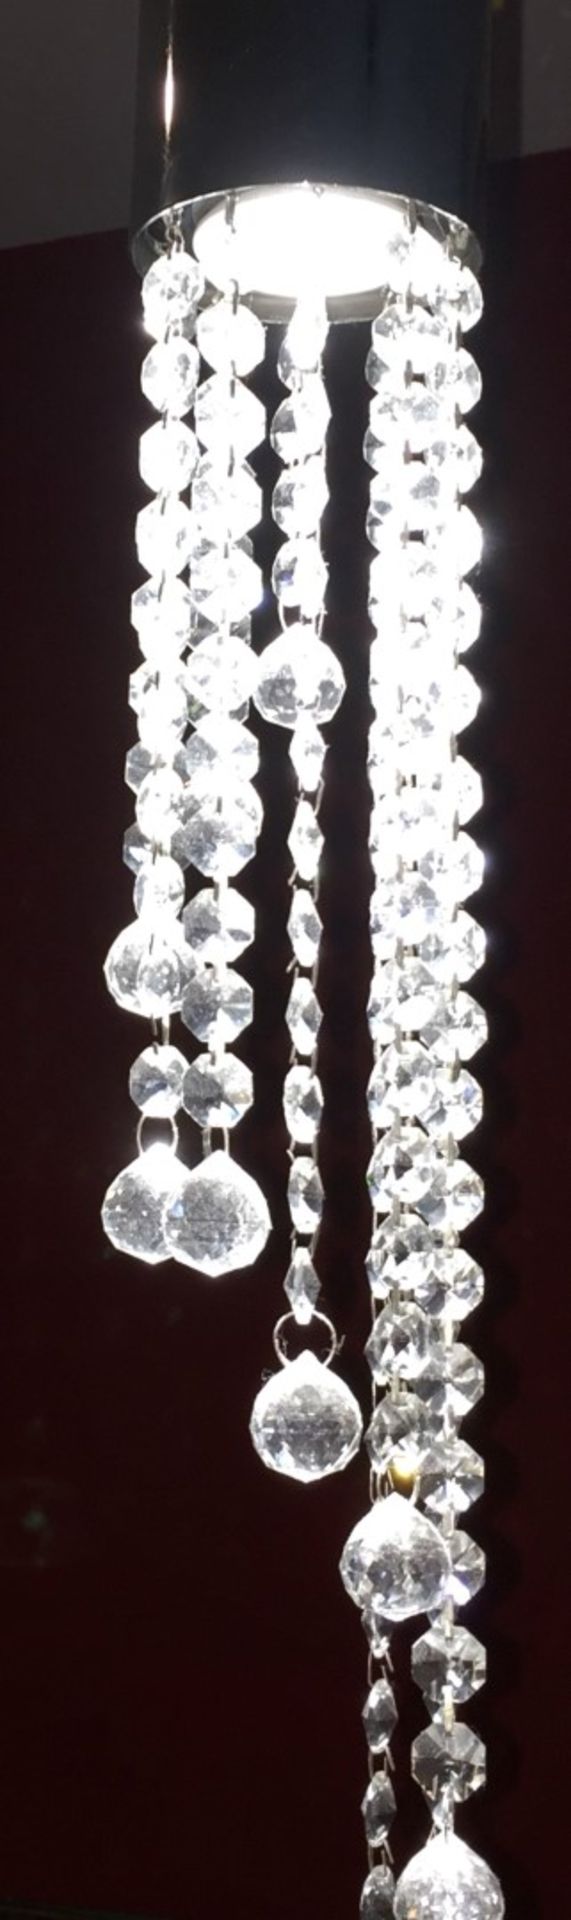 3 x Contemporary Pendant Ceiling Lights With Faux Crystal Droplets - CL188 - Ref GF2 - Drop - Image 4 of 6